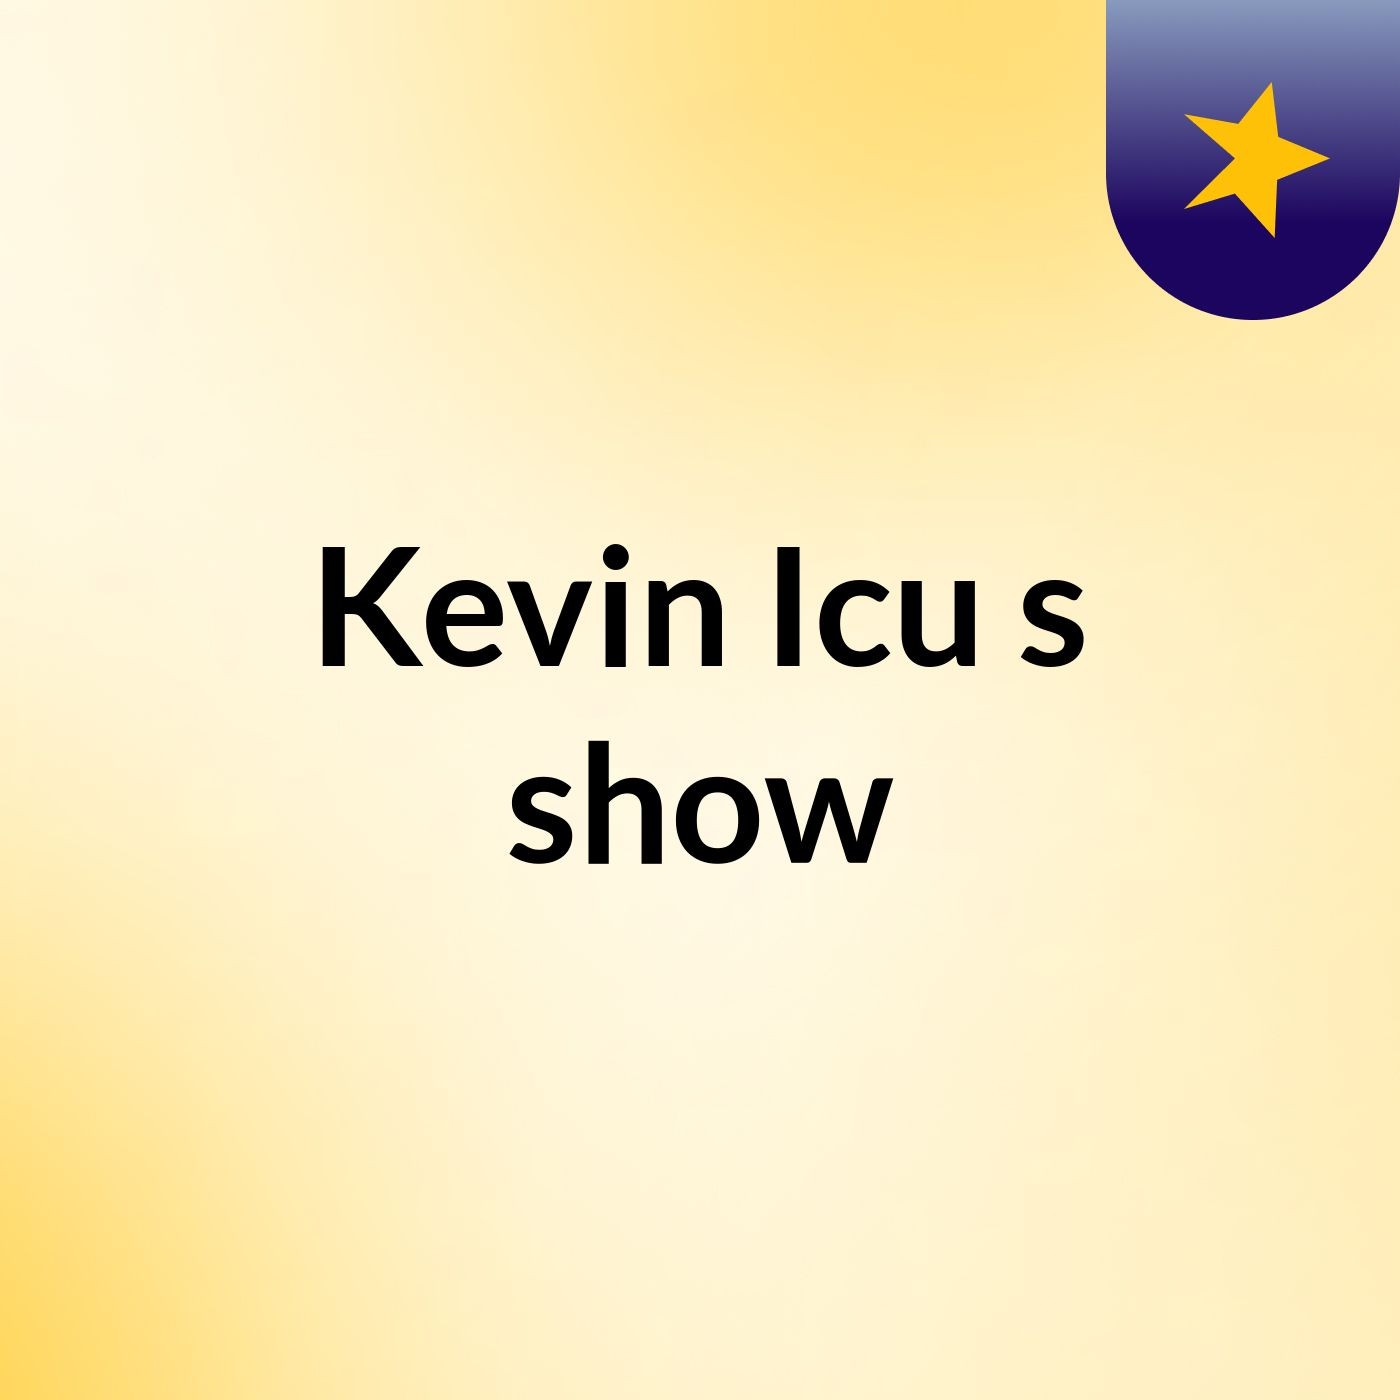 Kevin Icu's show